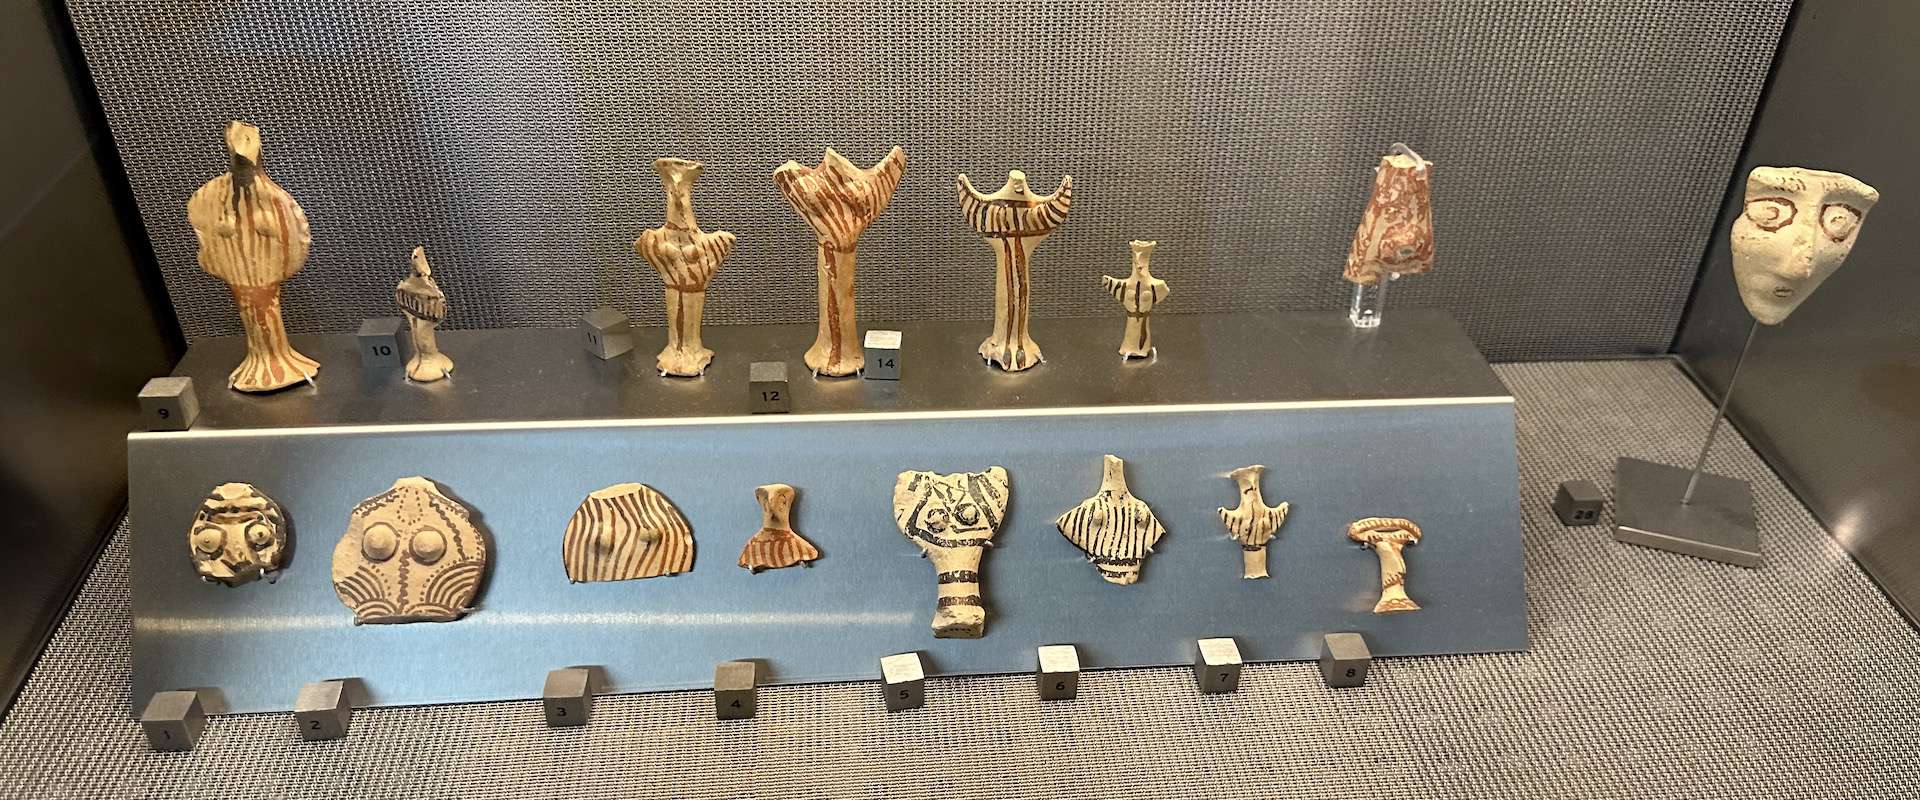 Mycenaean figurines and seals; 1400-1050 BC at the Acropolis Museum in Athens, Greece